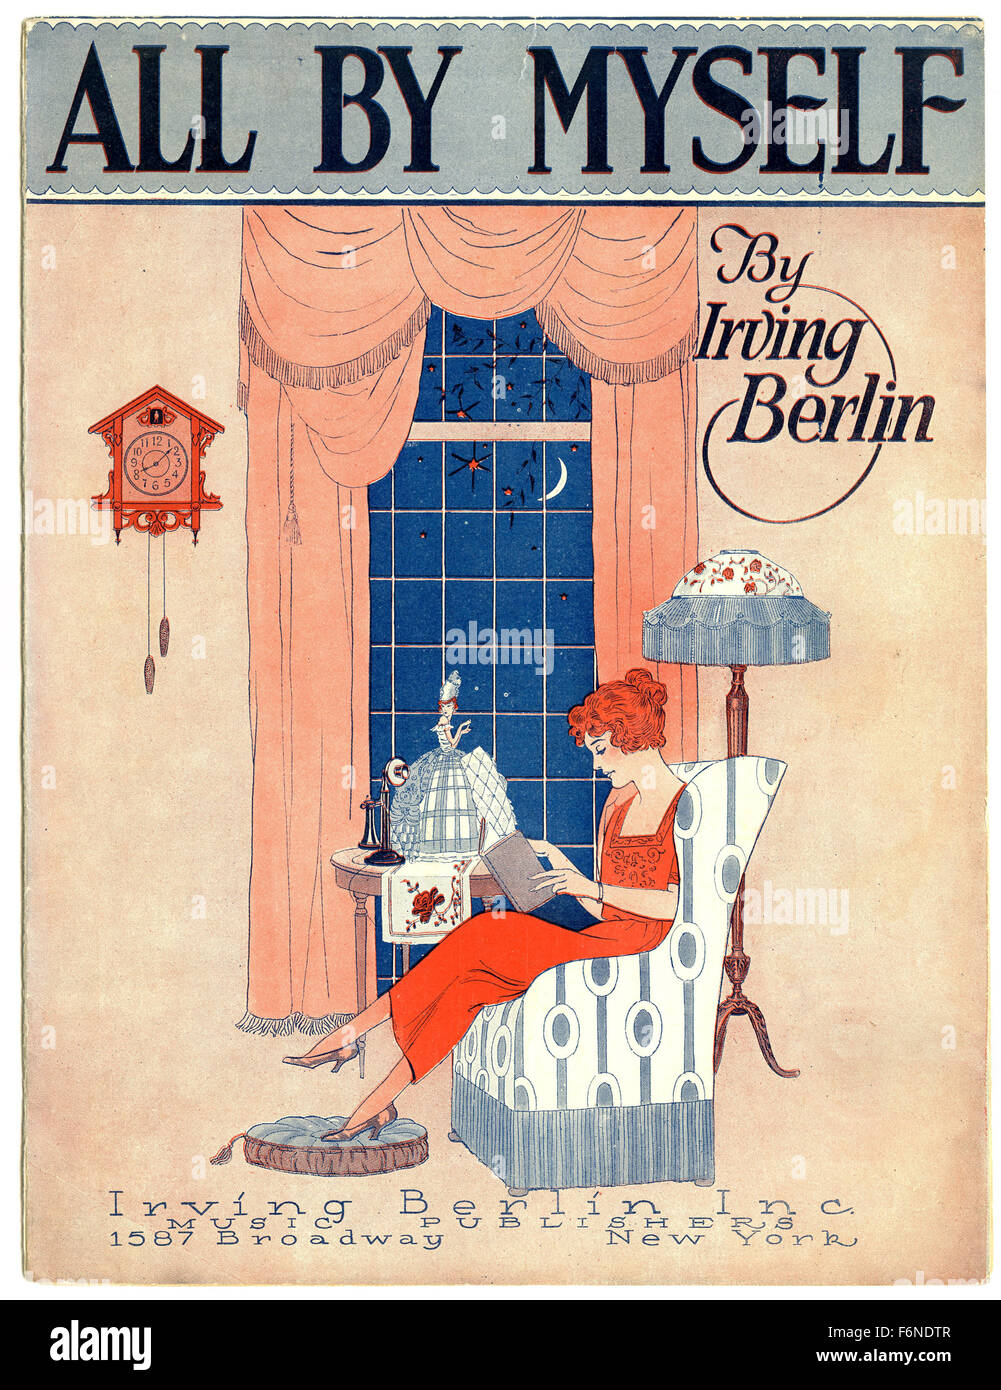 All By Myself (1921) by Irving Berlin piano sheet music cover Stock Photo